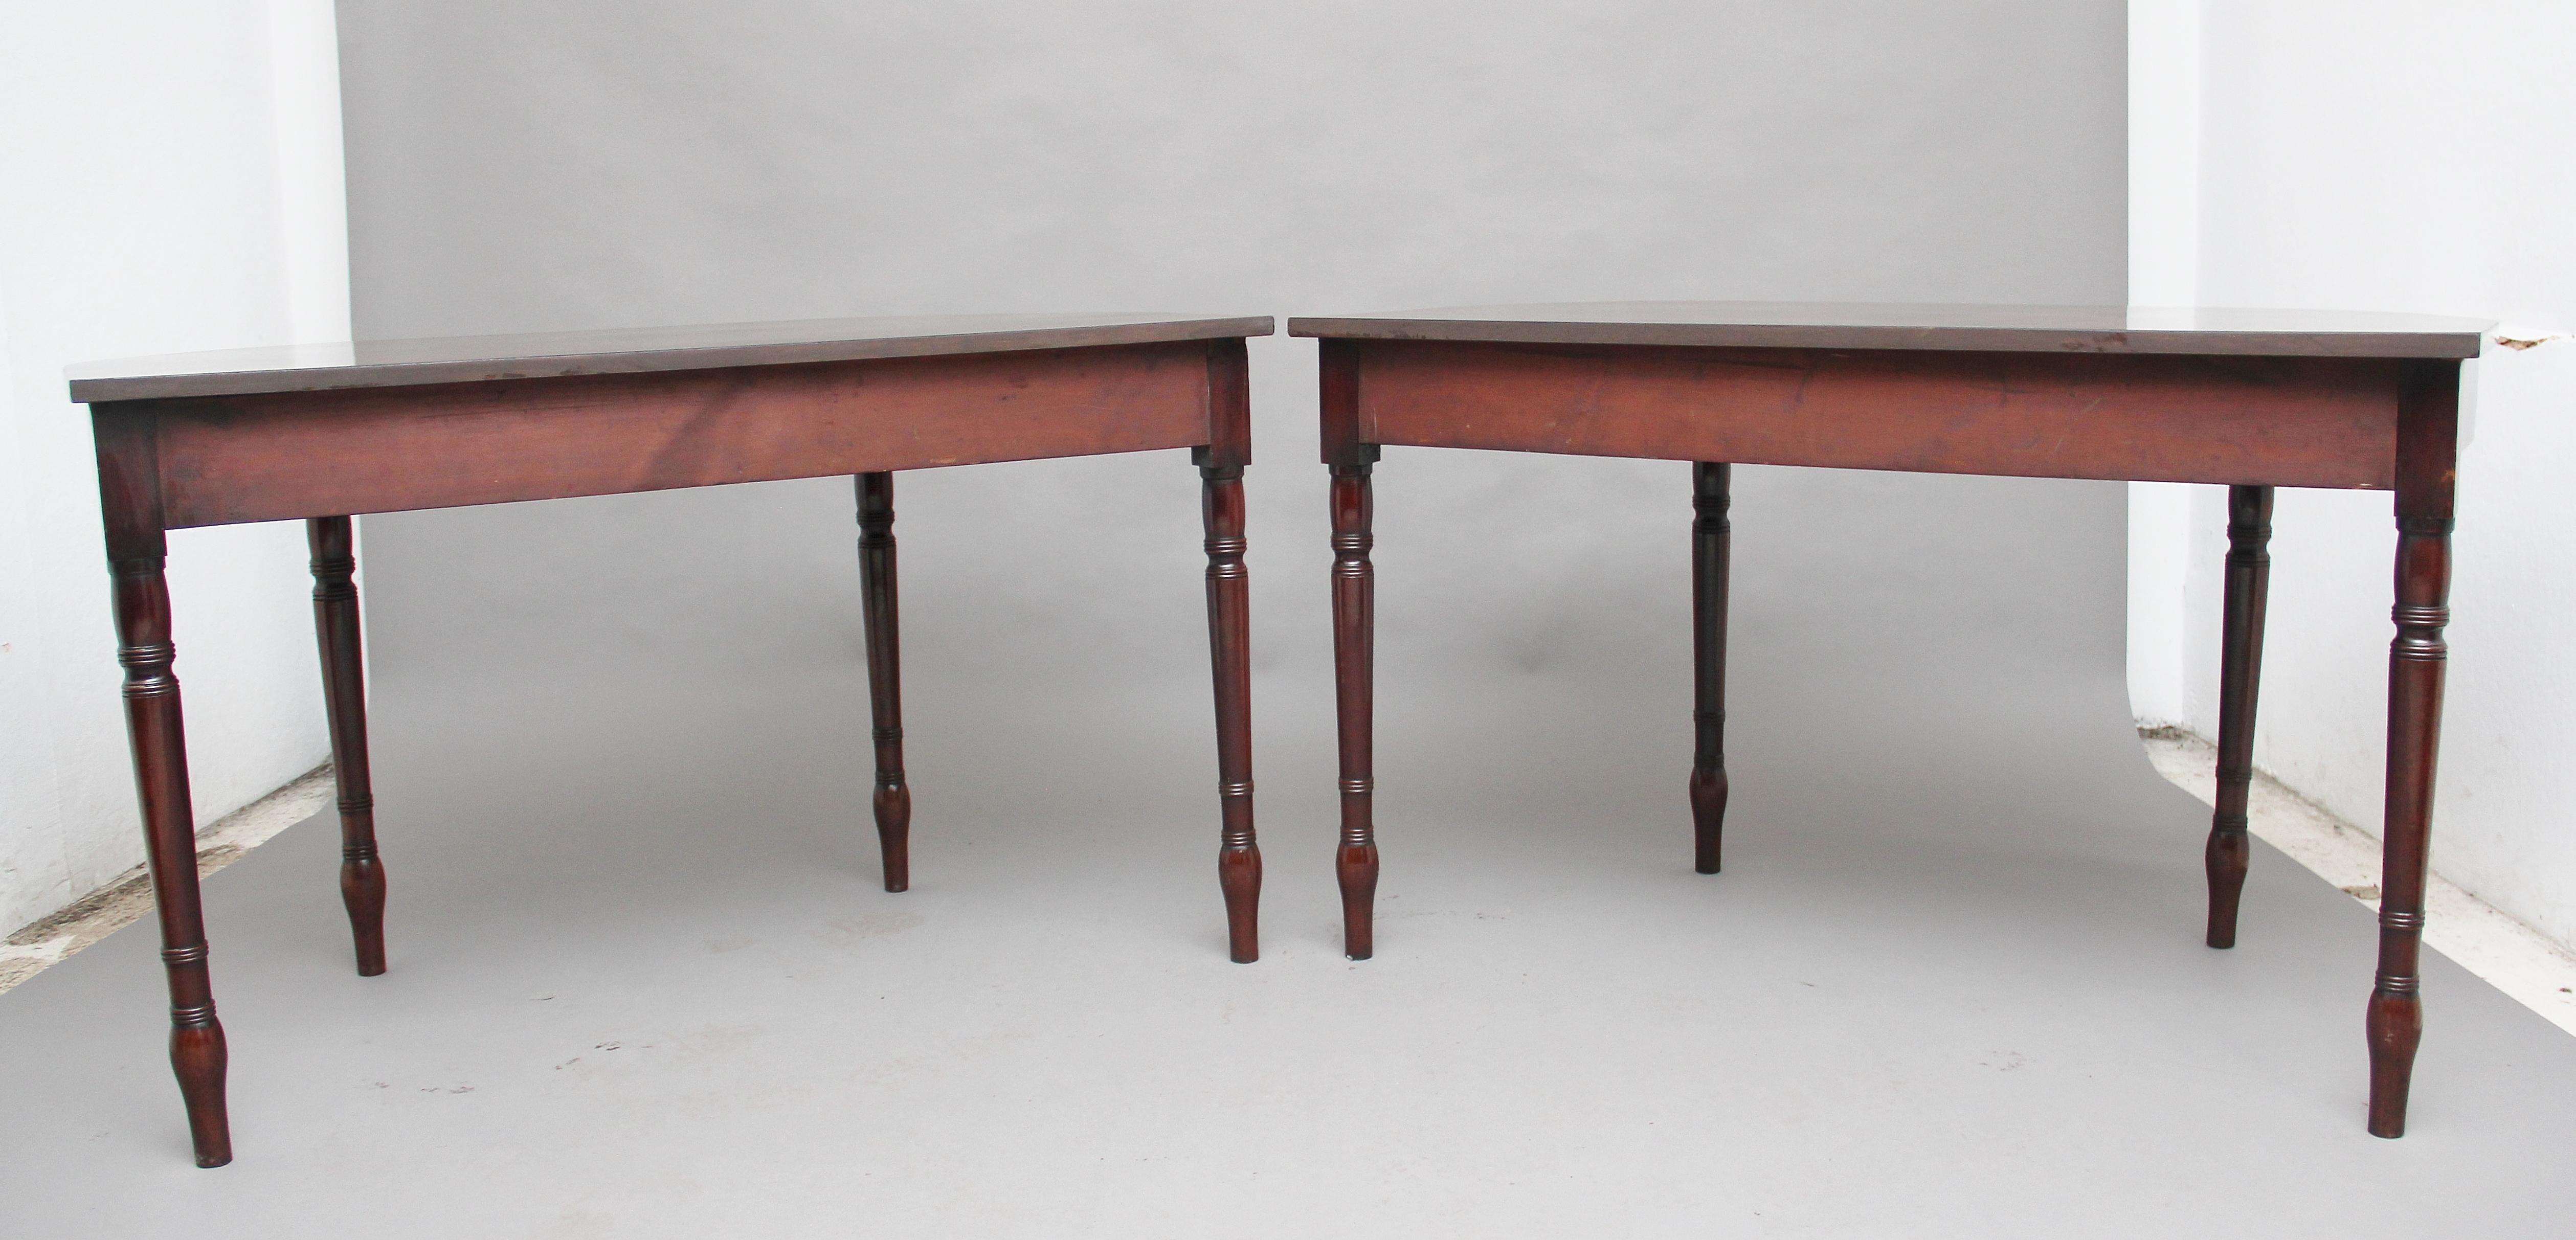 British Pair of Early 19th Century Mahogany Console Tables